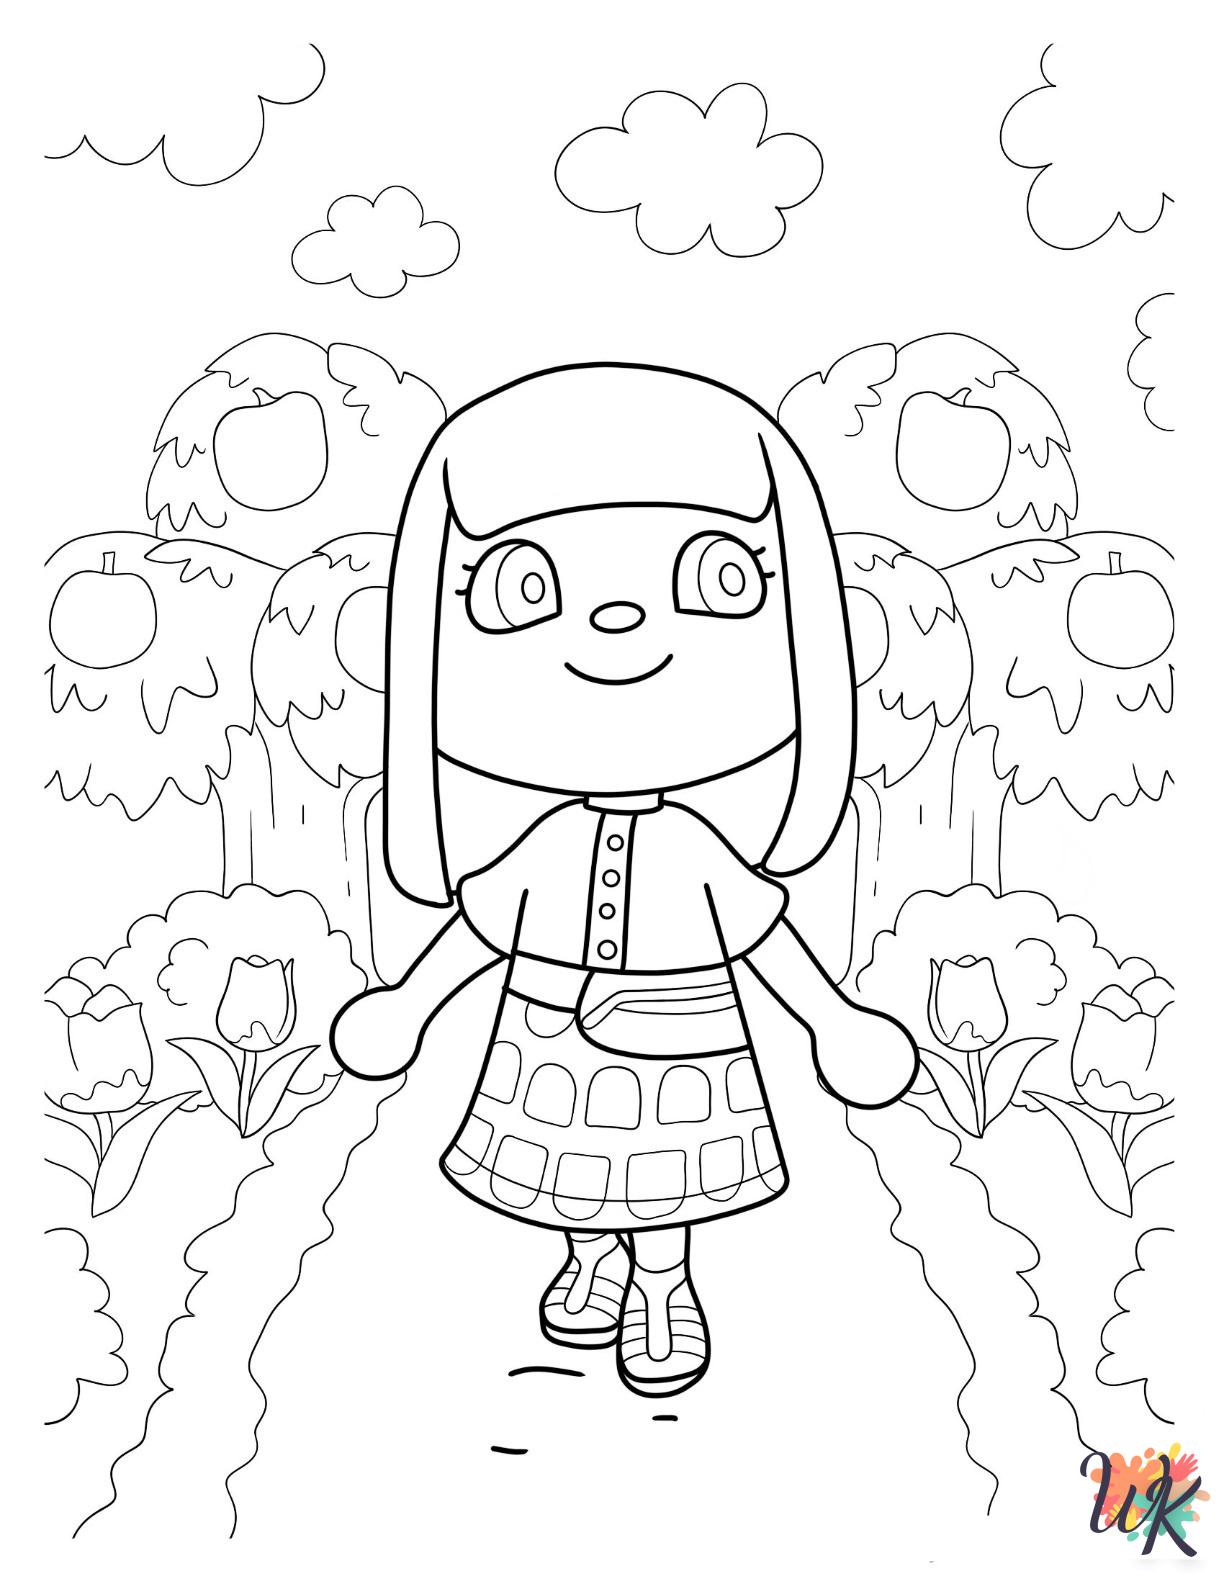 Animal Crossing themed coloring pages